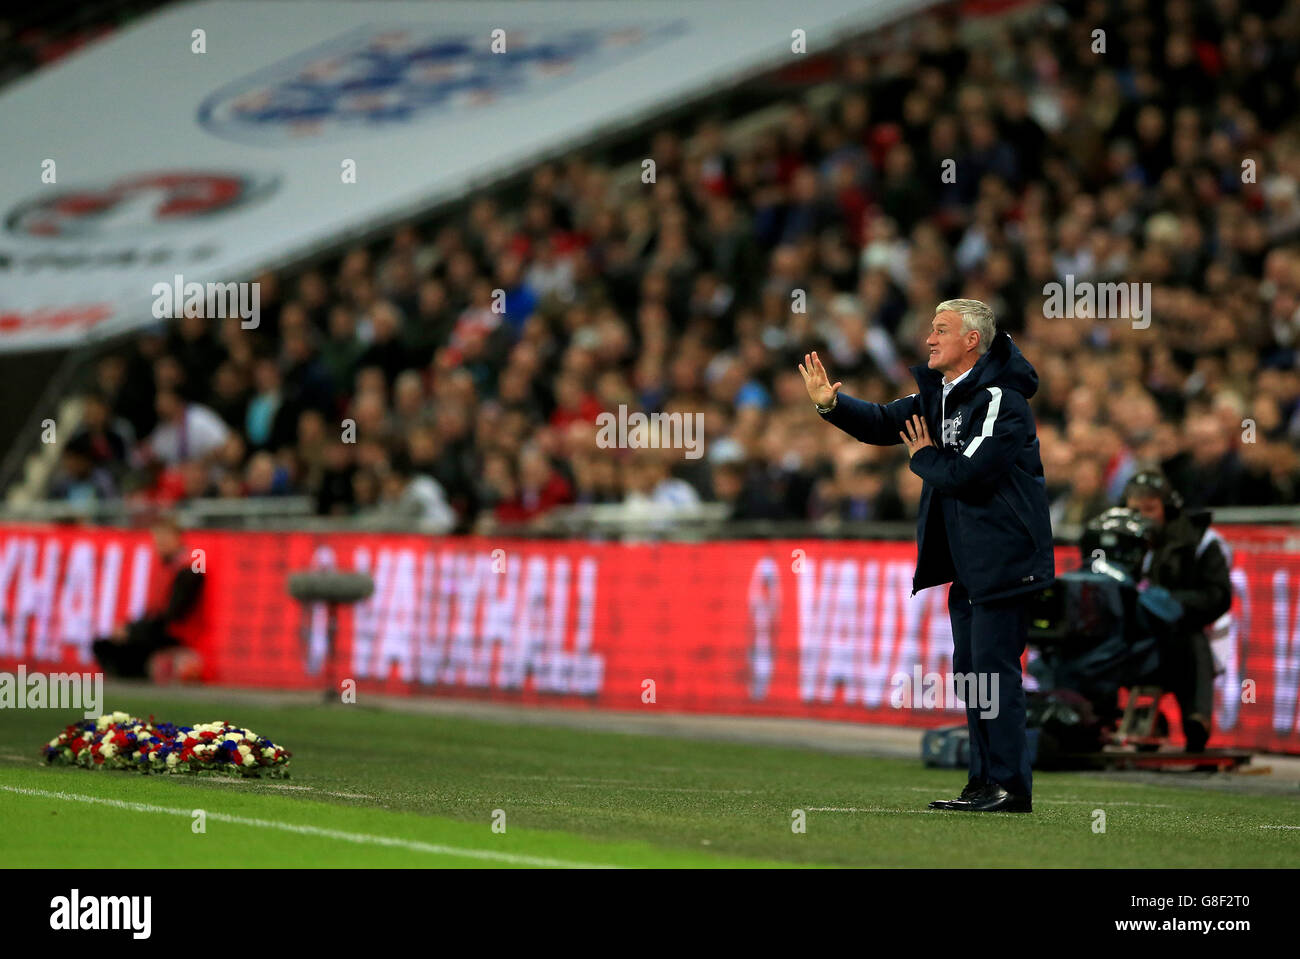 France manager Didier Deschamps on the touchline during the international friendly match at Wembley Stadium, London. Stock Photo